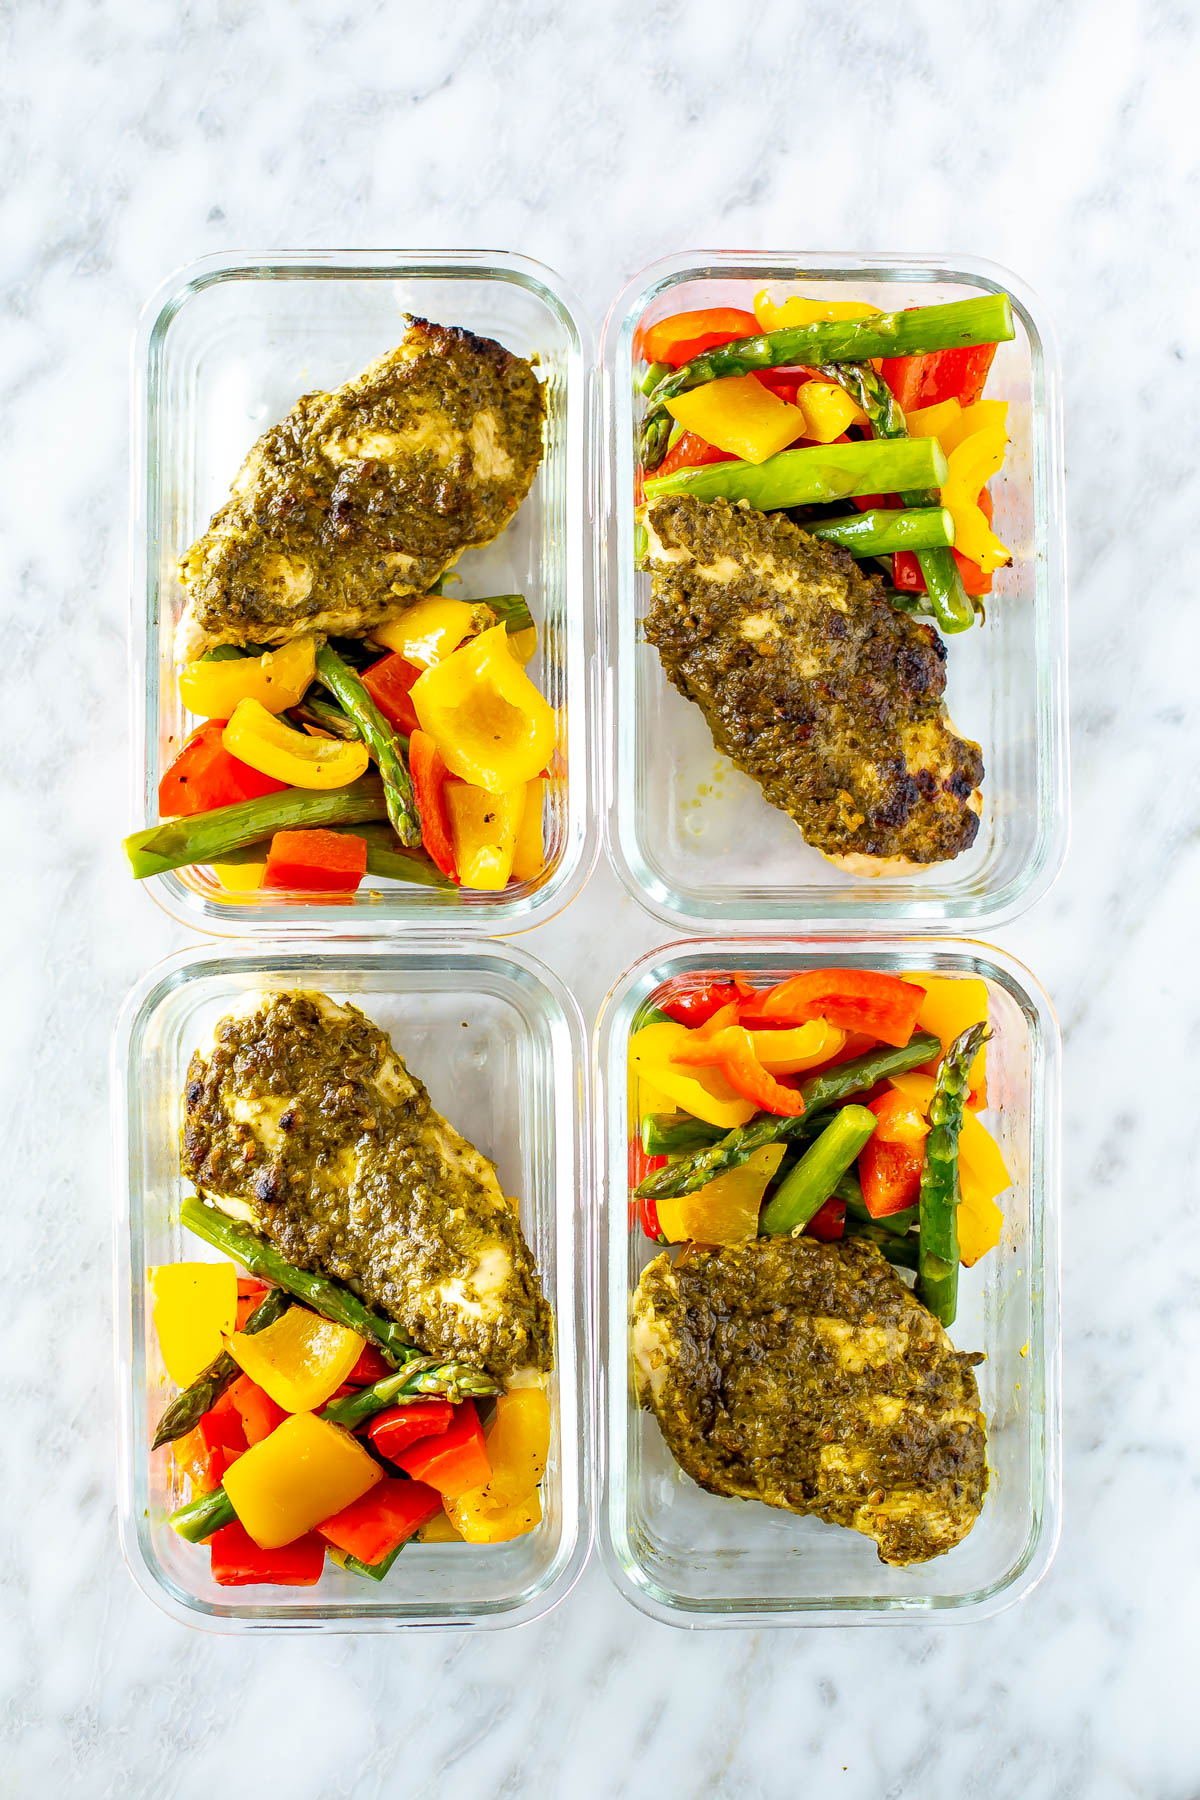 Pesto coated chicken cutlets with asparagus, red pepper and yellow pepper in square glass meal prep containers.